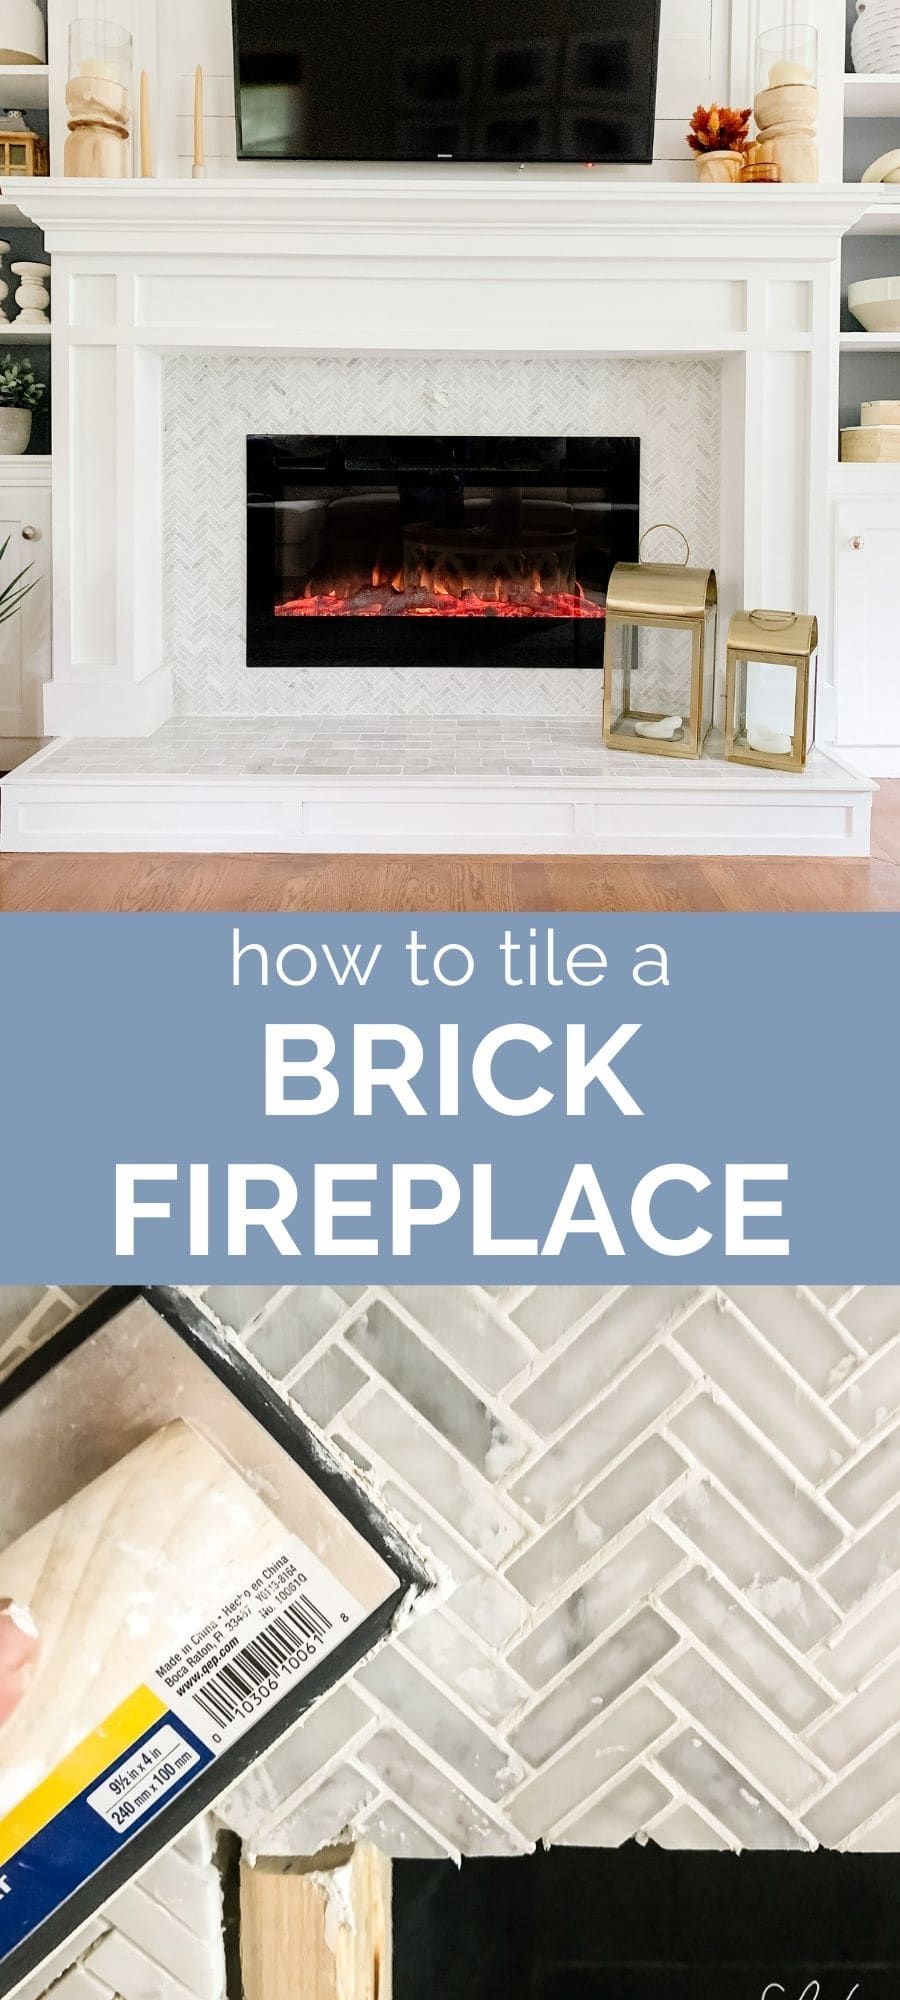 How To Tile A Brick Fireplace Jenna, How To Install A Fireplace Surround Over Brick